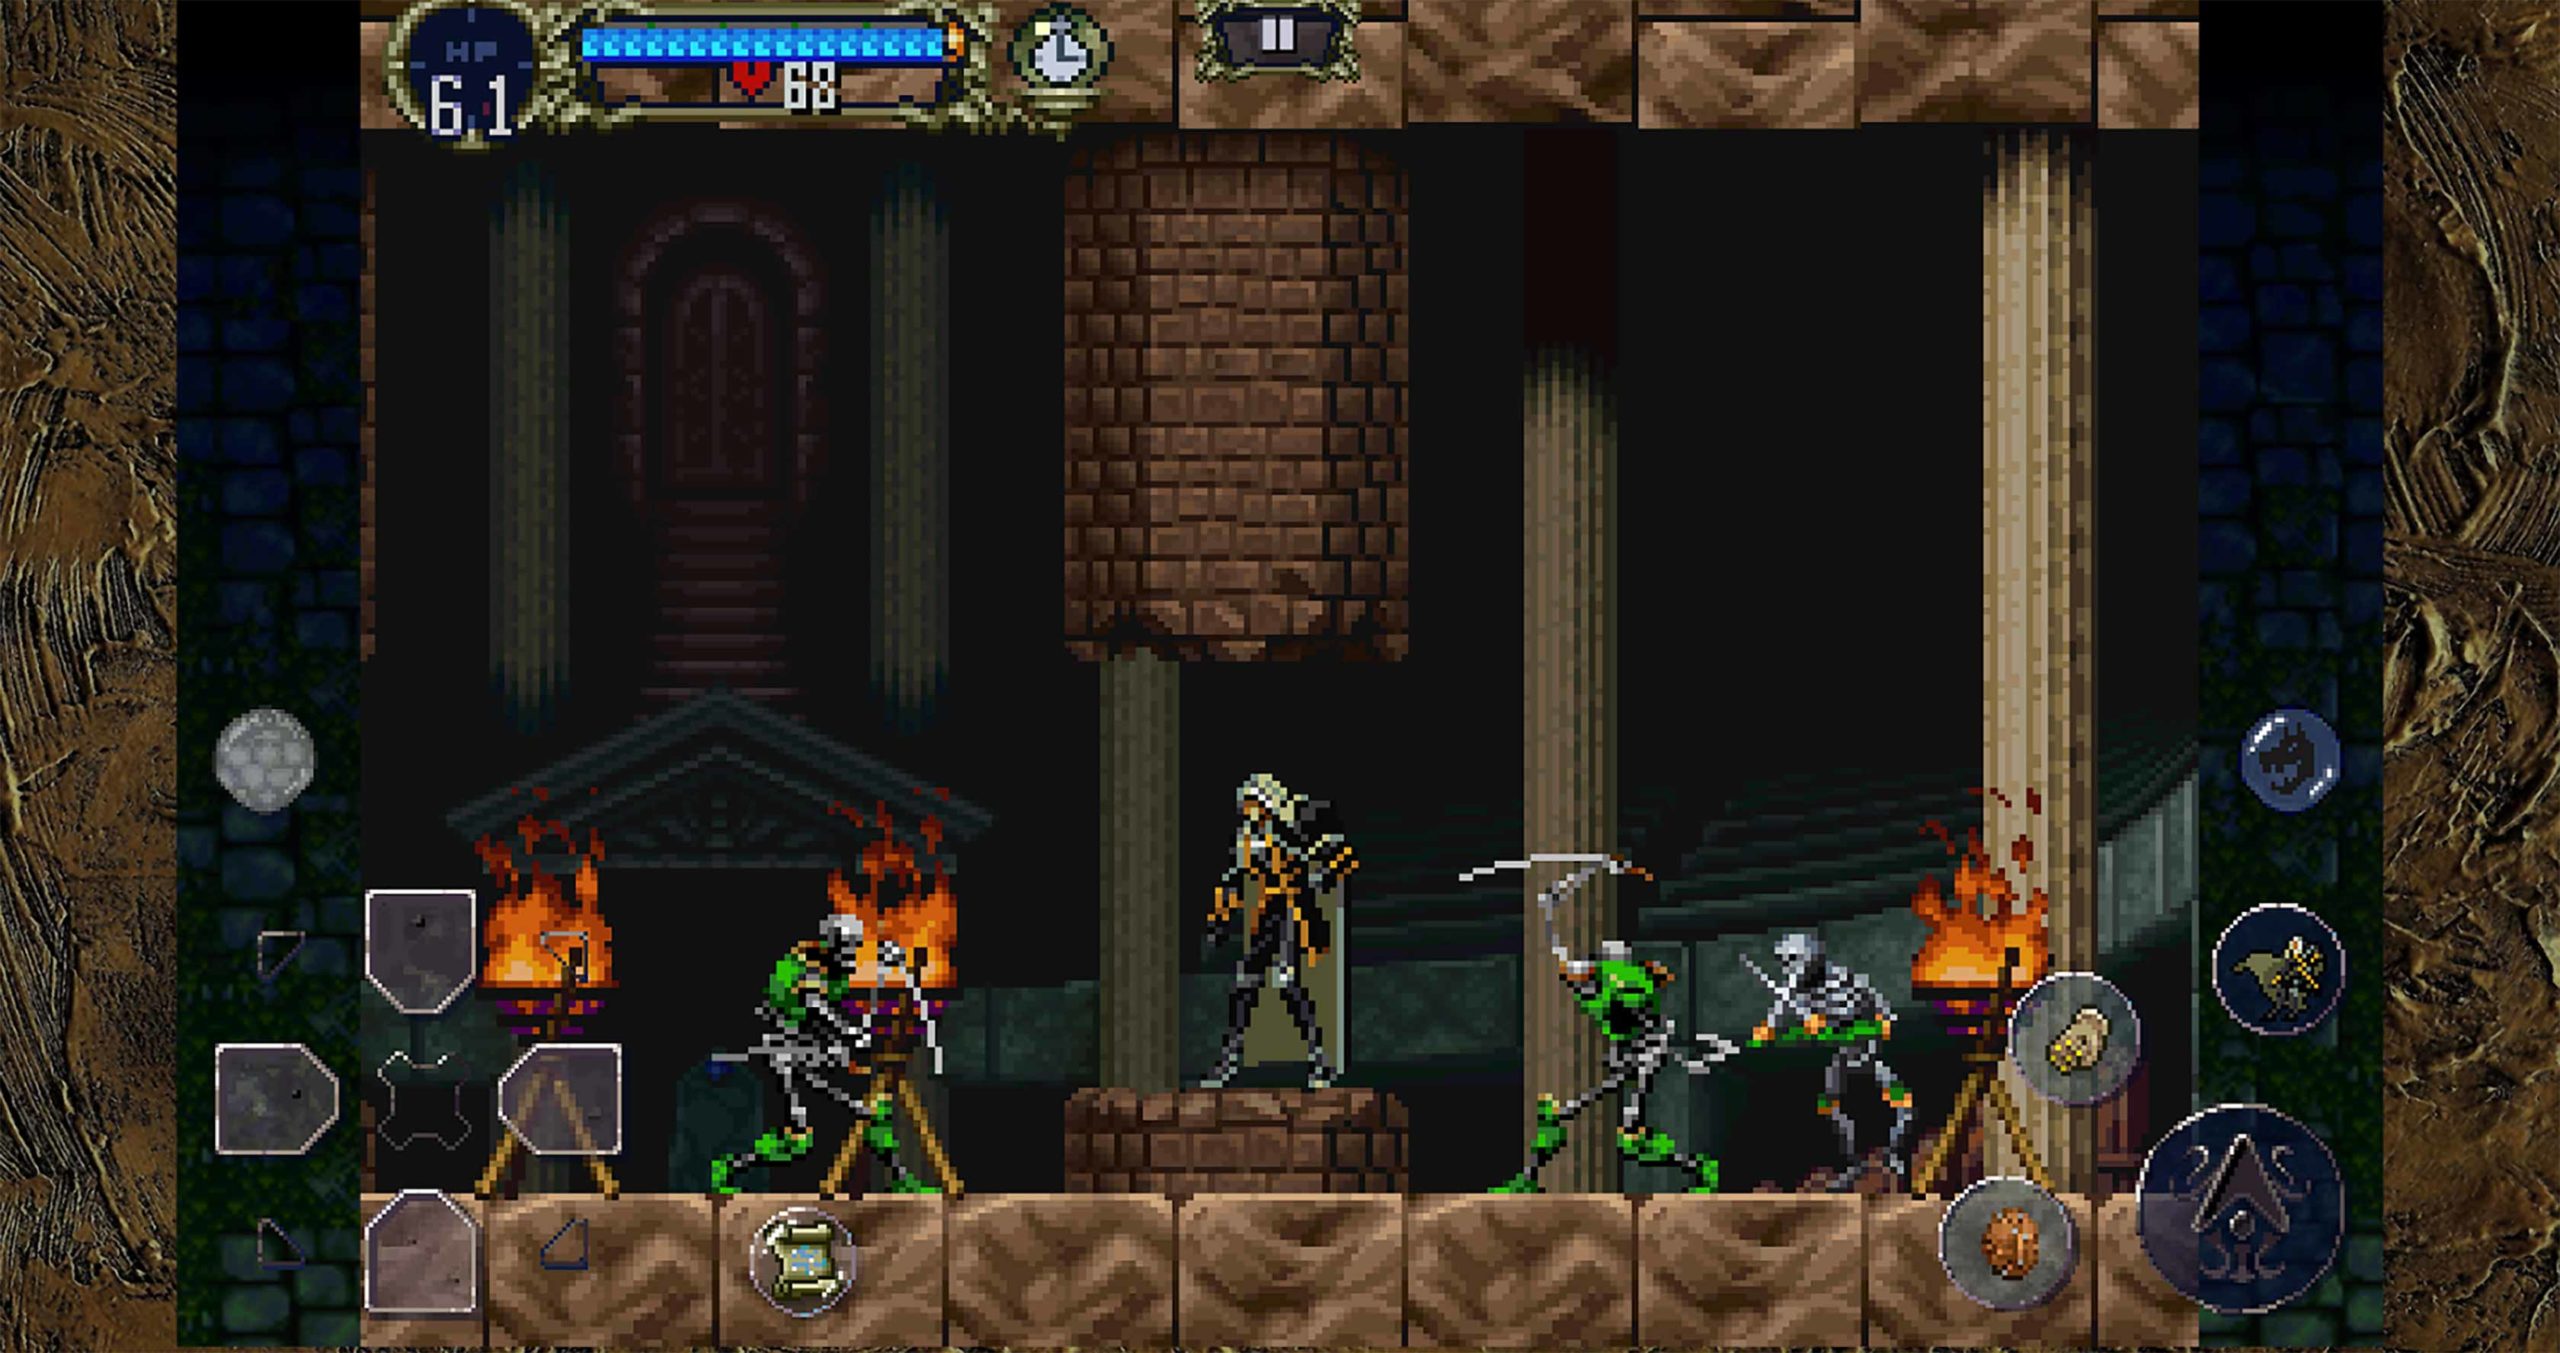 Castlevania: Symphony of the Night mobile